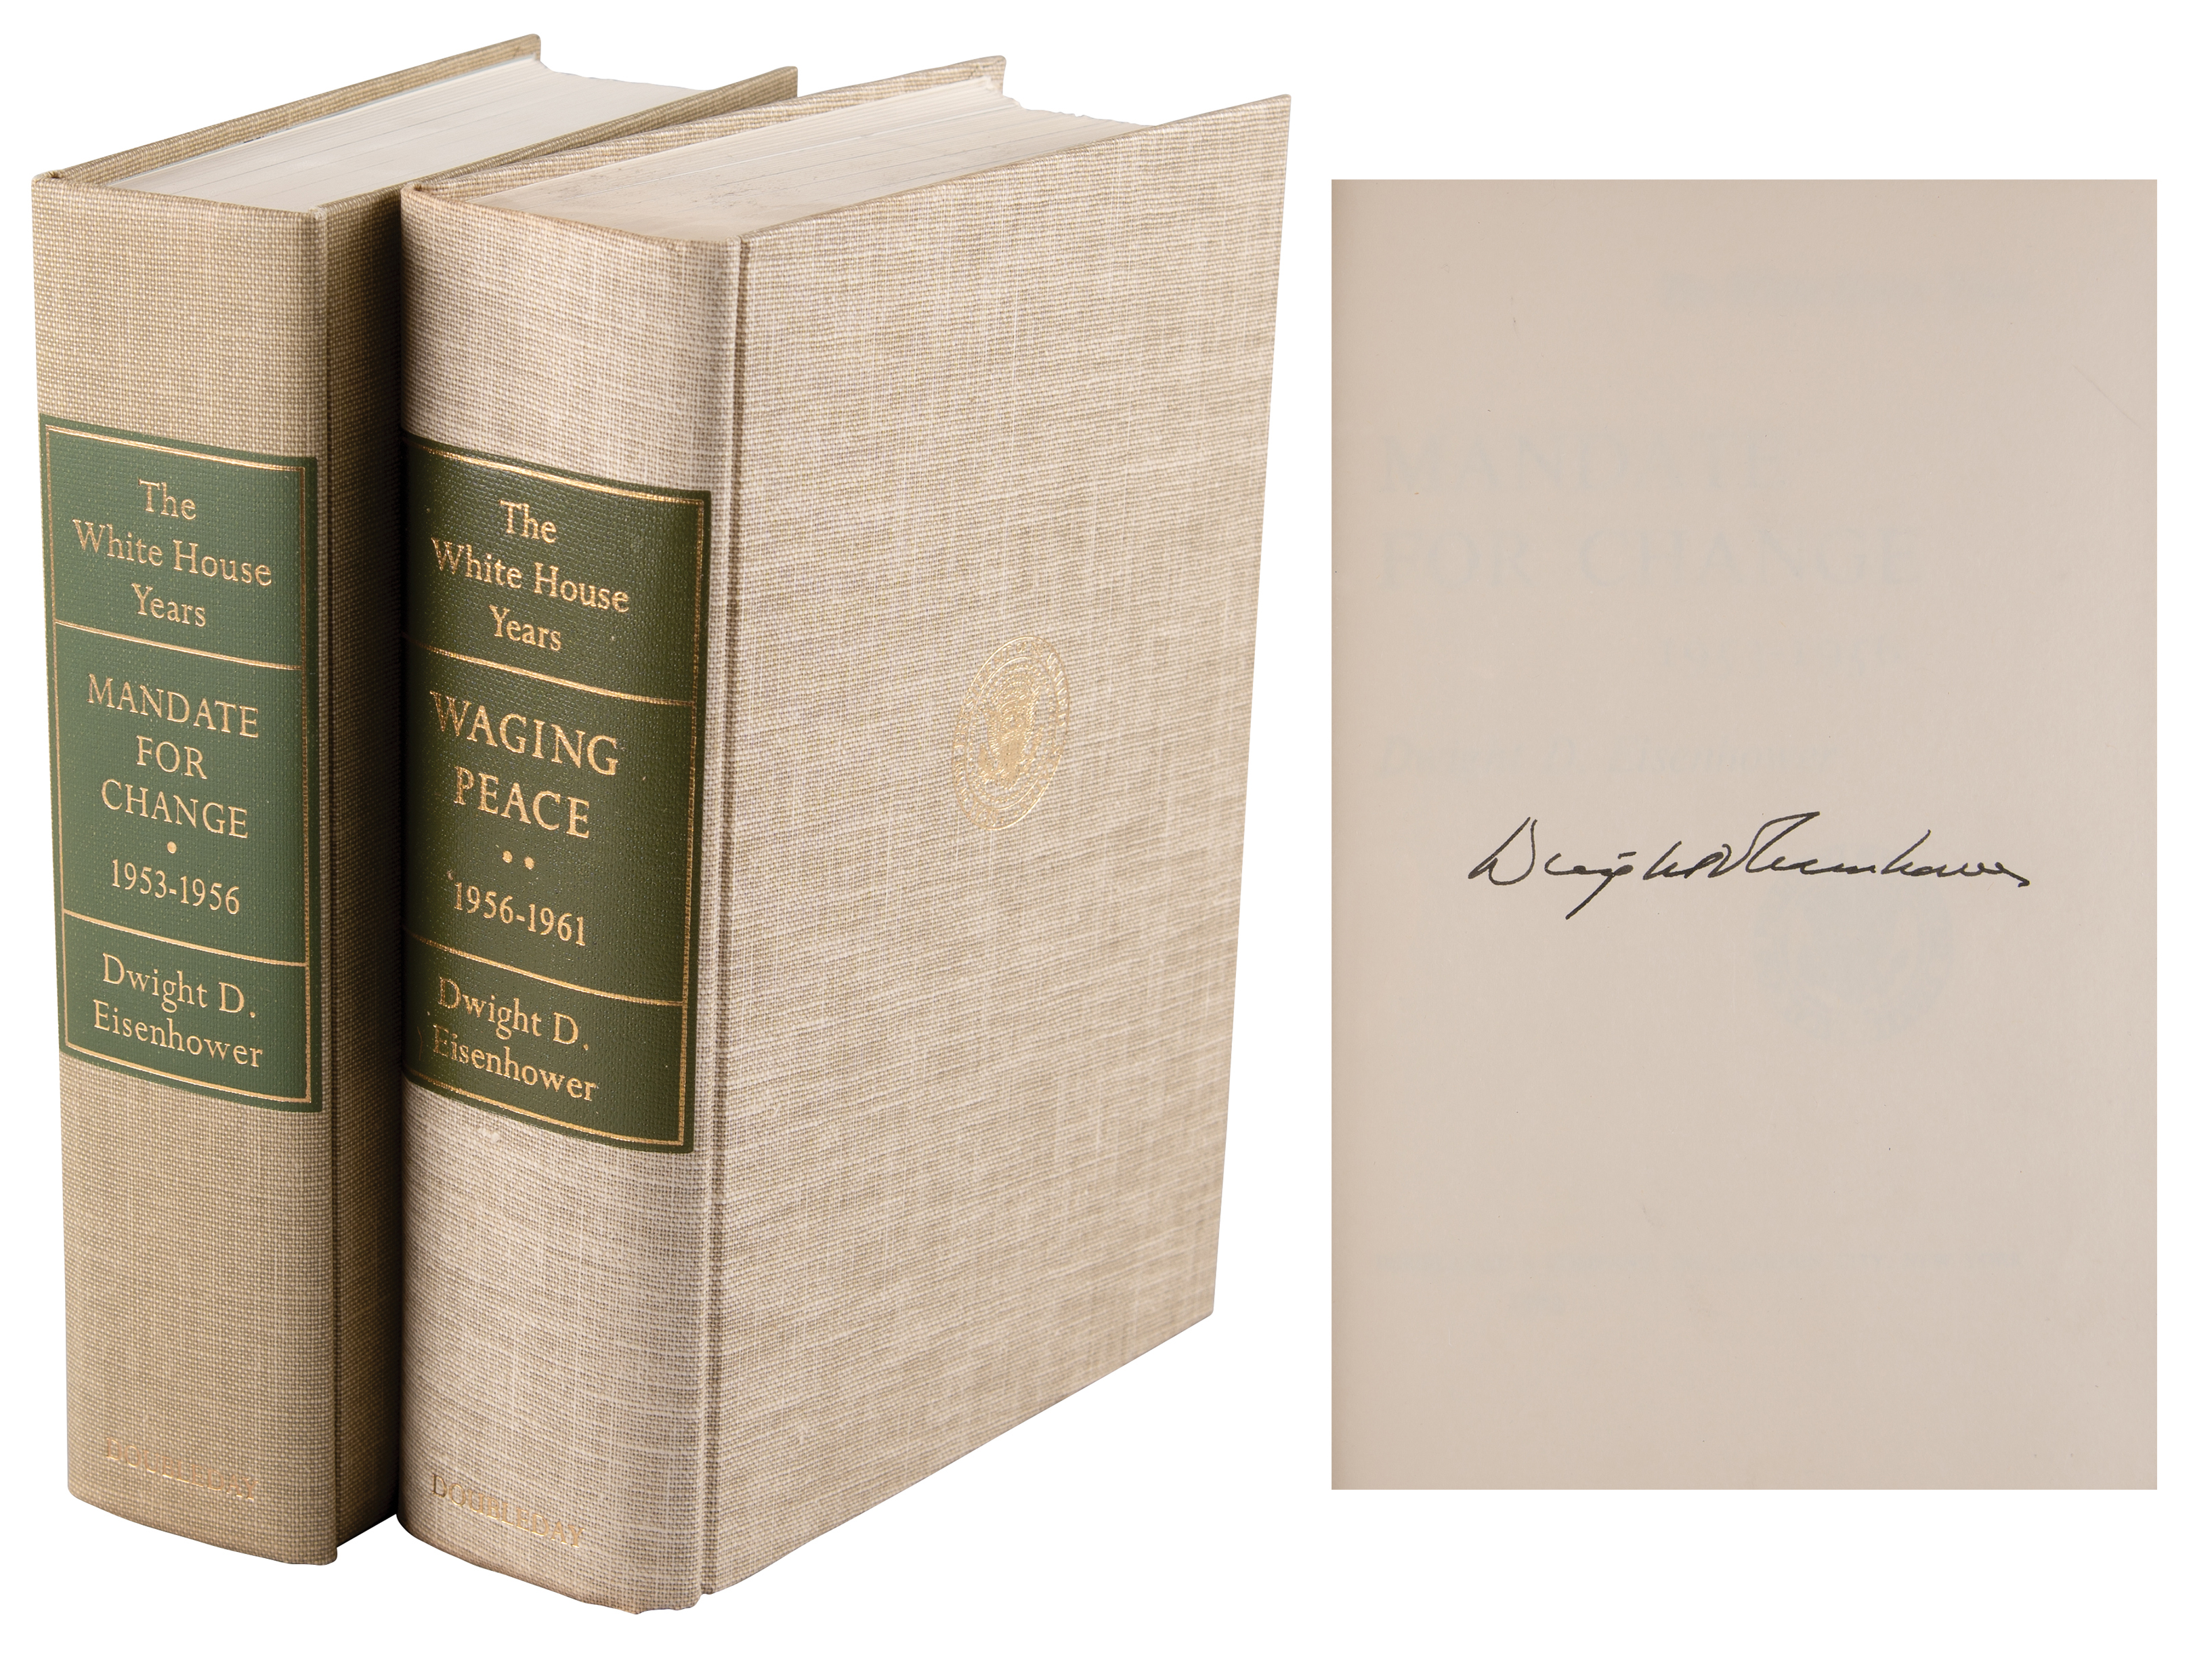 Lot #30 Dwight D. Eisenhower Signed Books (From Herbert Hoover's Collection) - Image 1